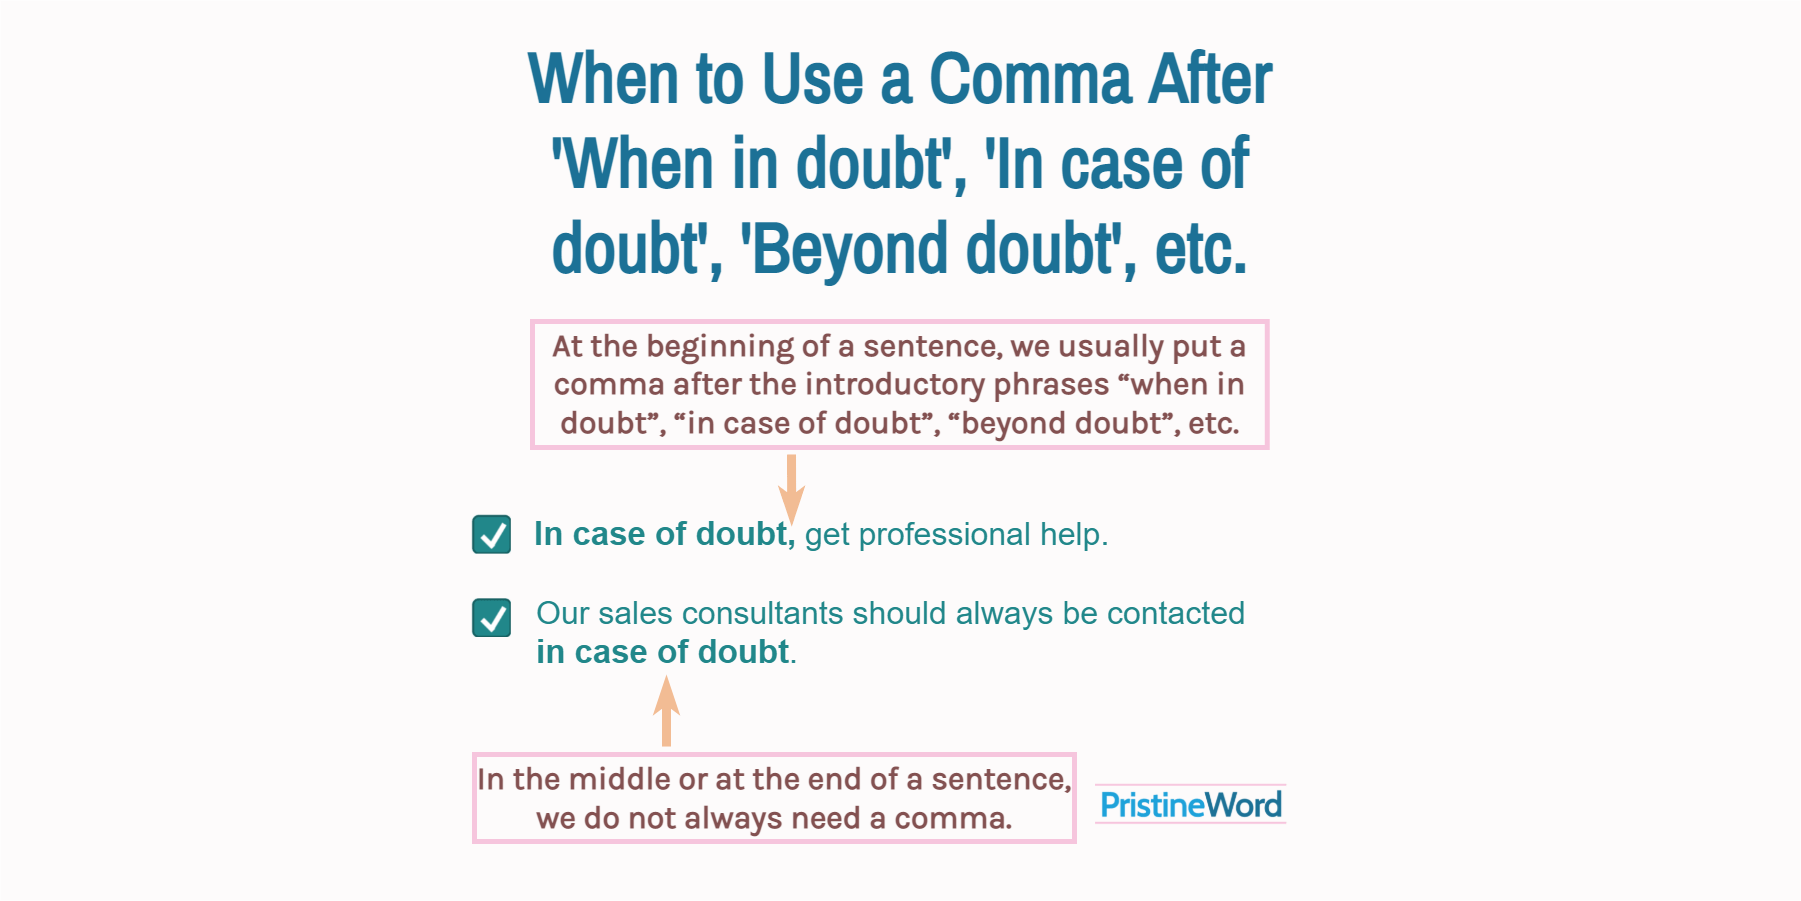 When to Use Commas After 'When in doubt', 'In case of doubt', 'Beyond doubt', etc.